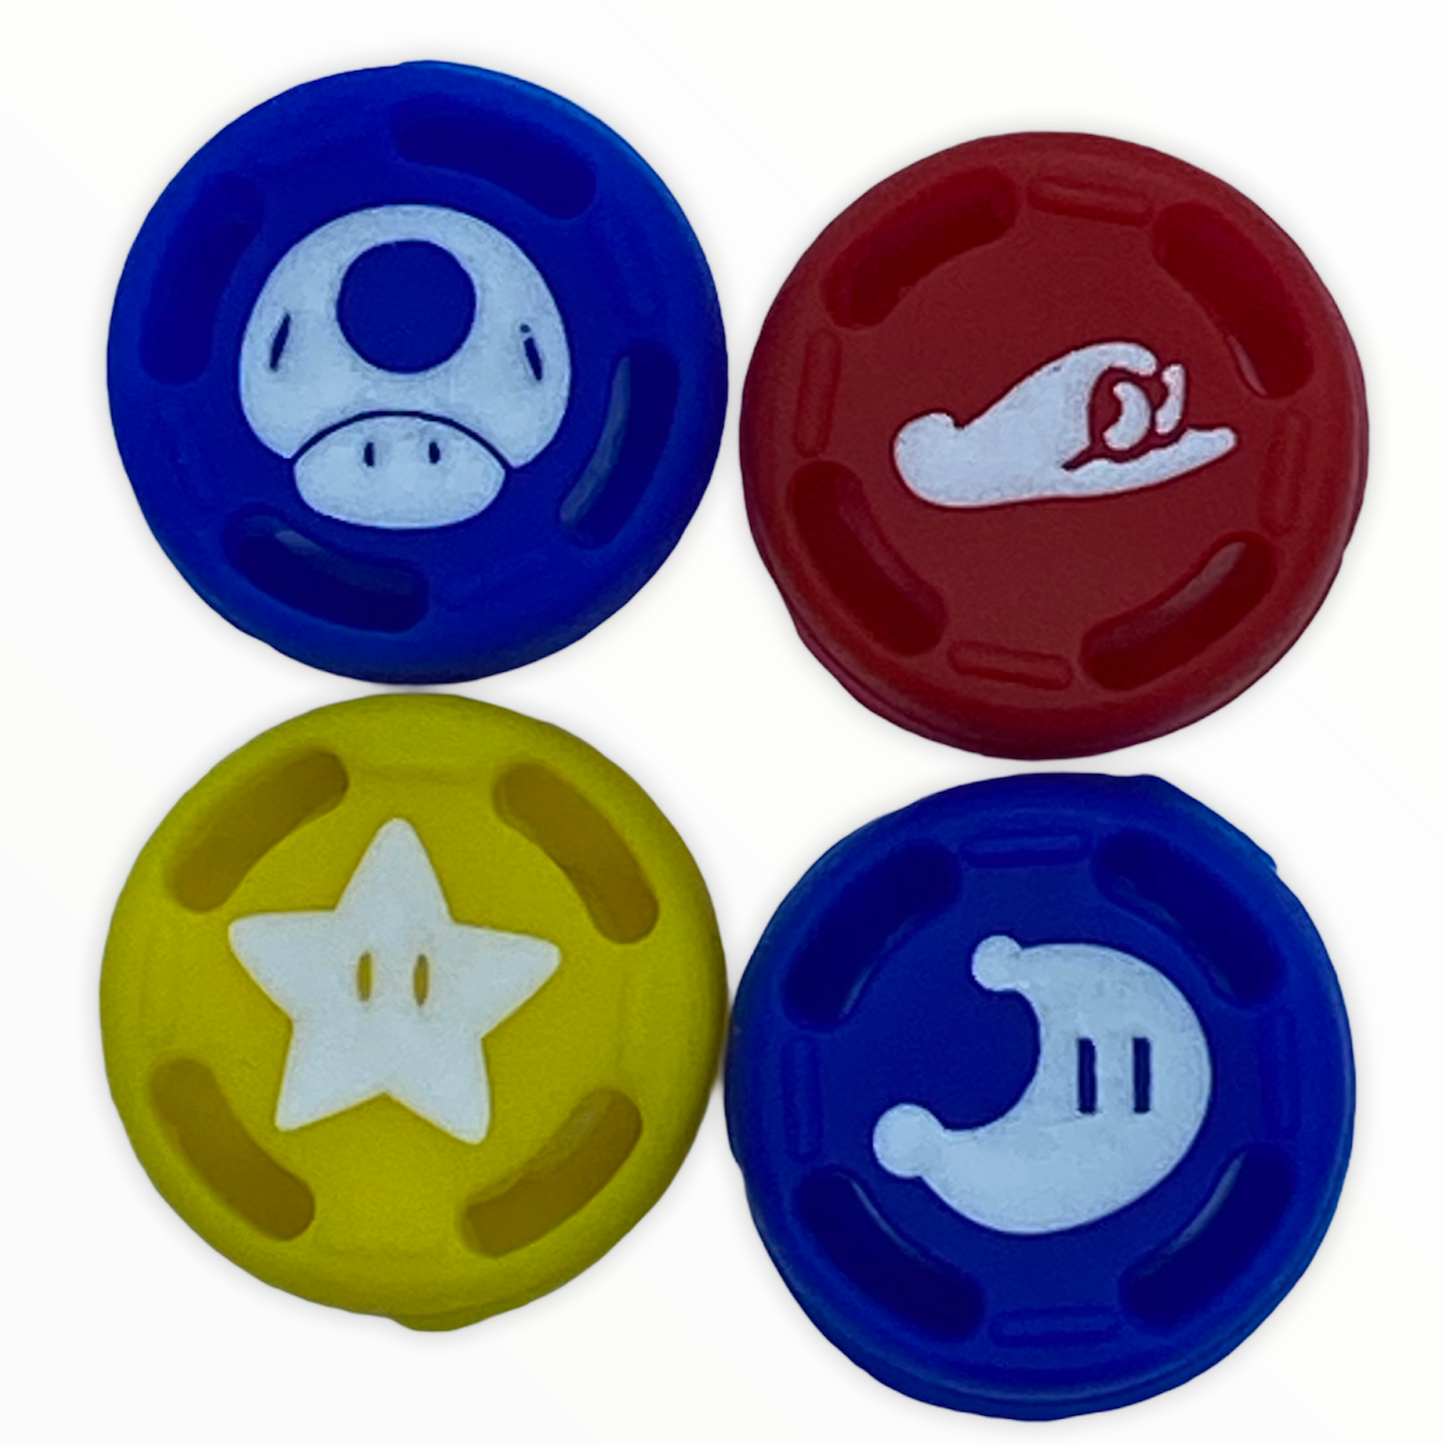 JenDore Blue Moon Mushroom Red Hat Yellow Star 4Pcs Silicone Thumb Grip Caps for Nintendo Switch